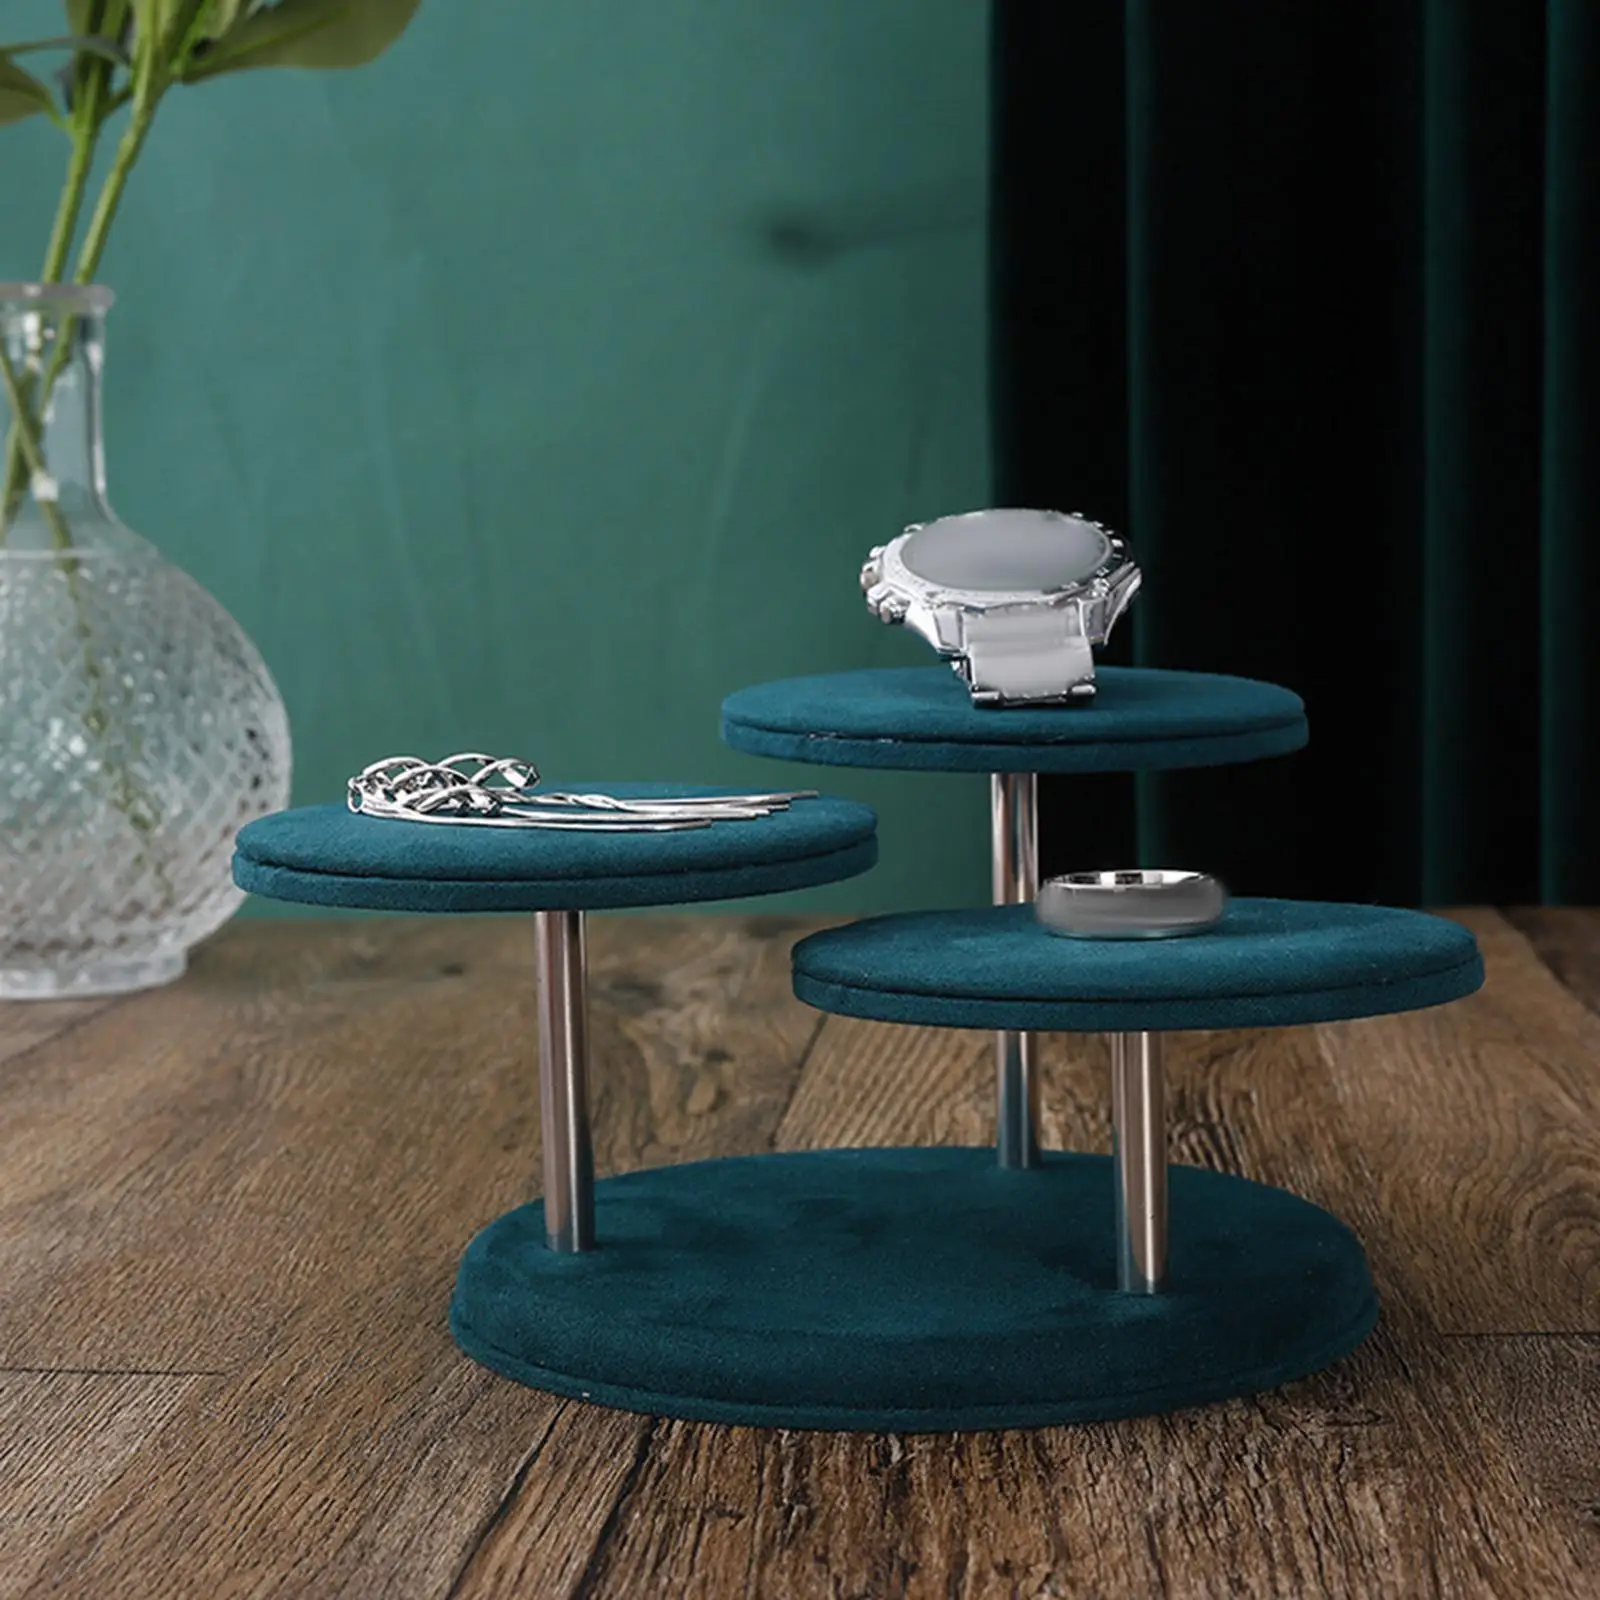 Jewelry Display Stand, with Base. 3 Round Disc. Design Tower Storage Rack Showing Tray Organizer for Necklace Hair Ring Women